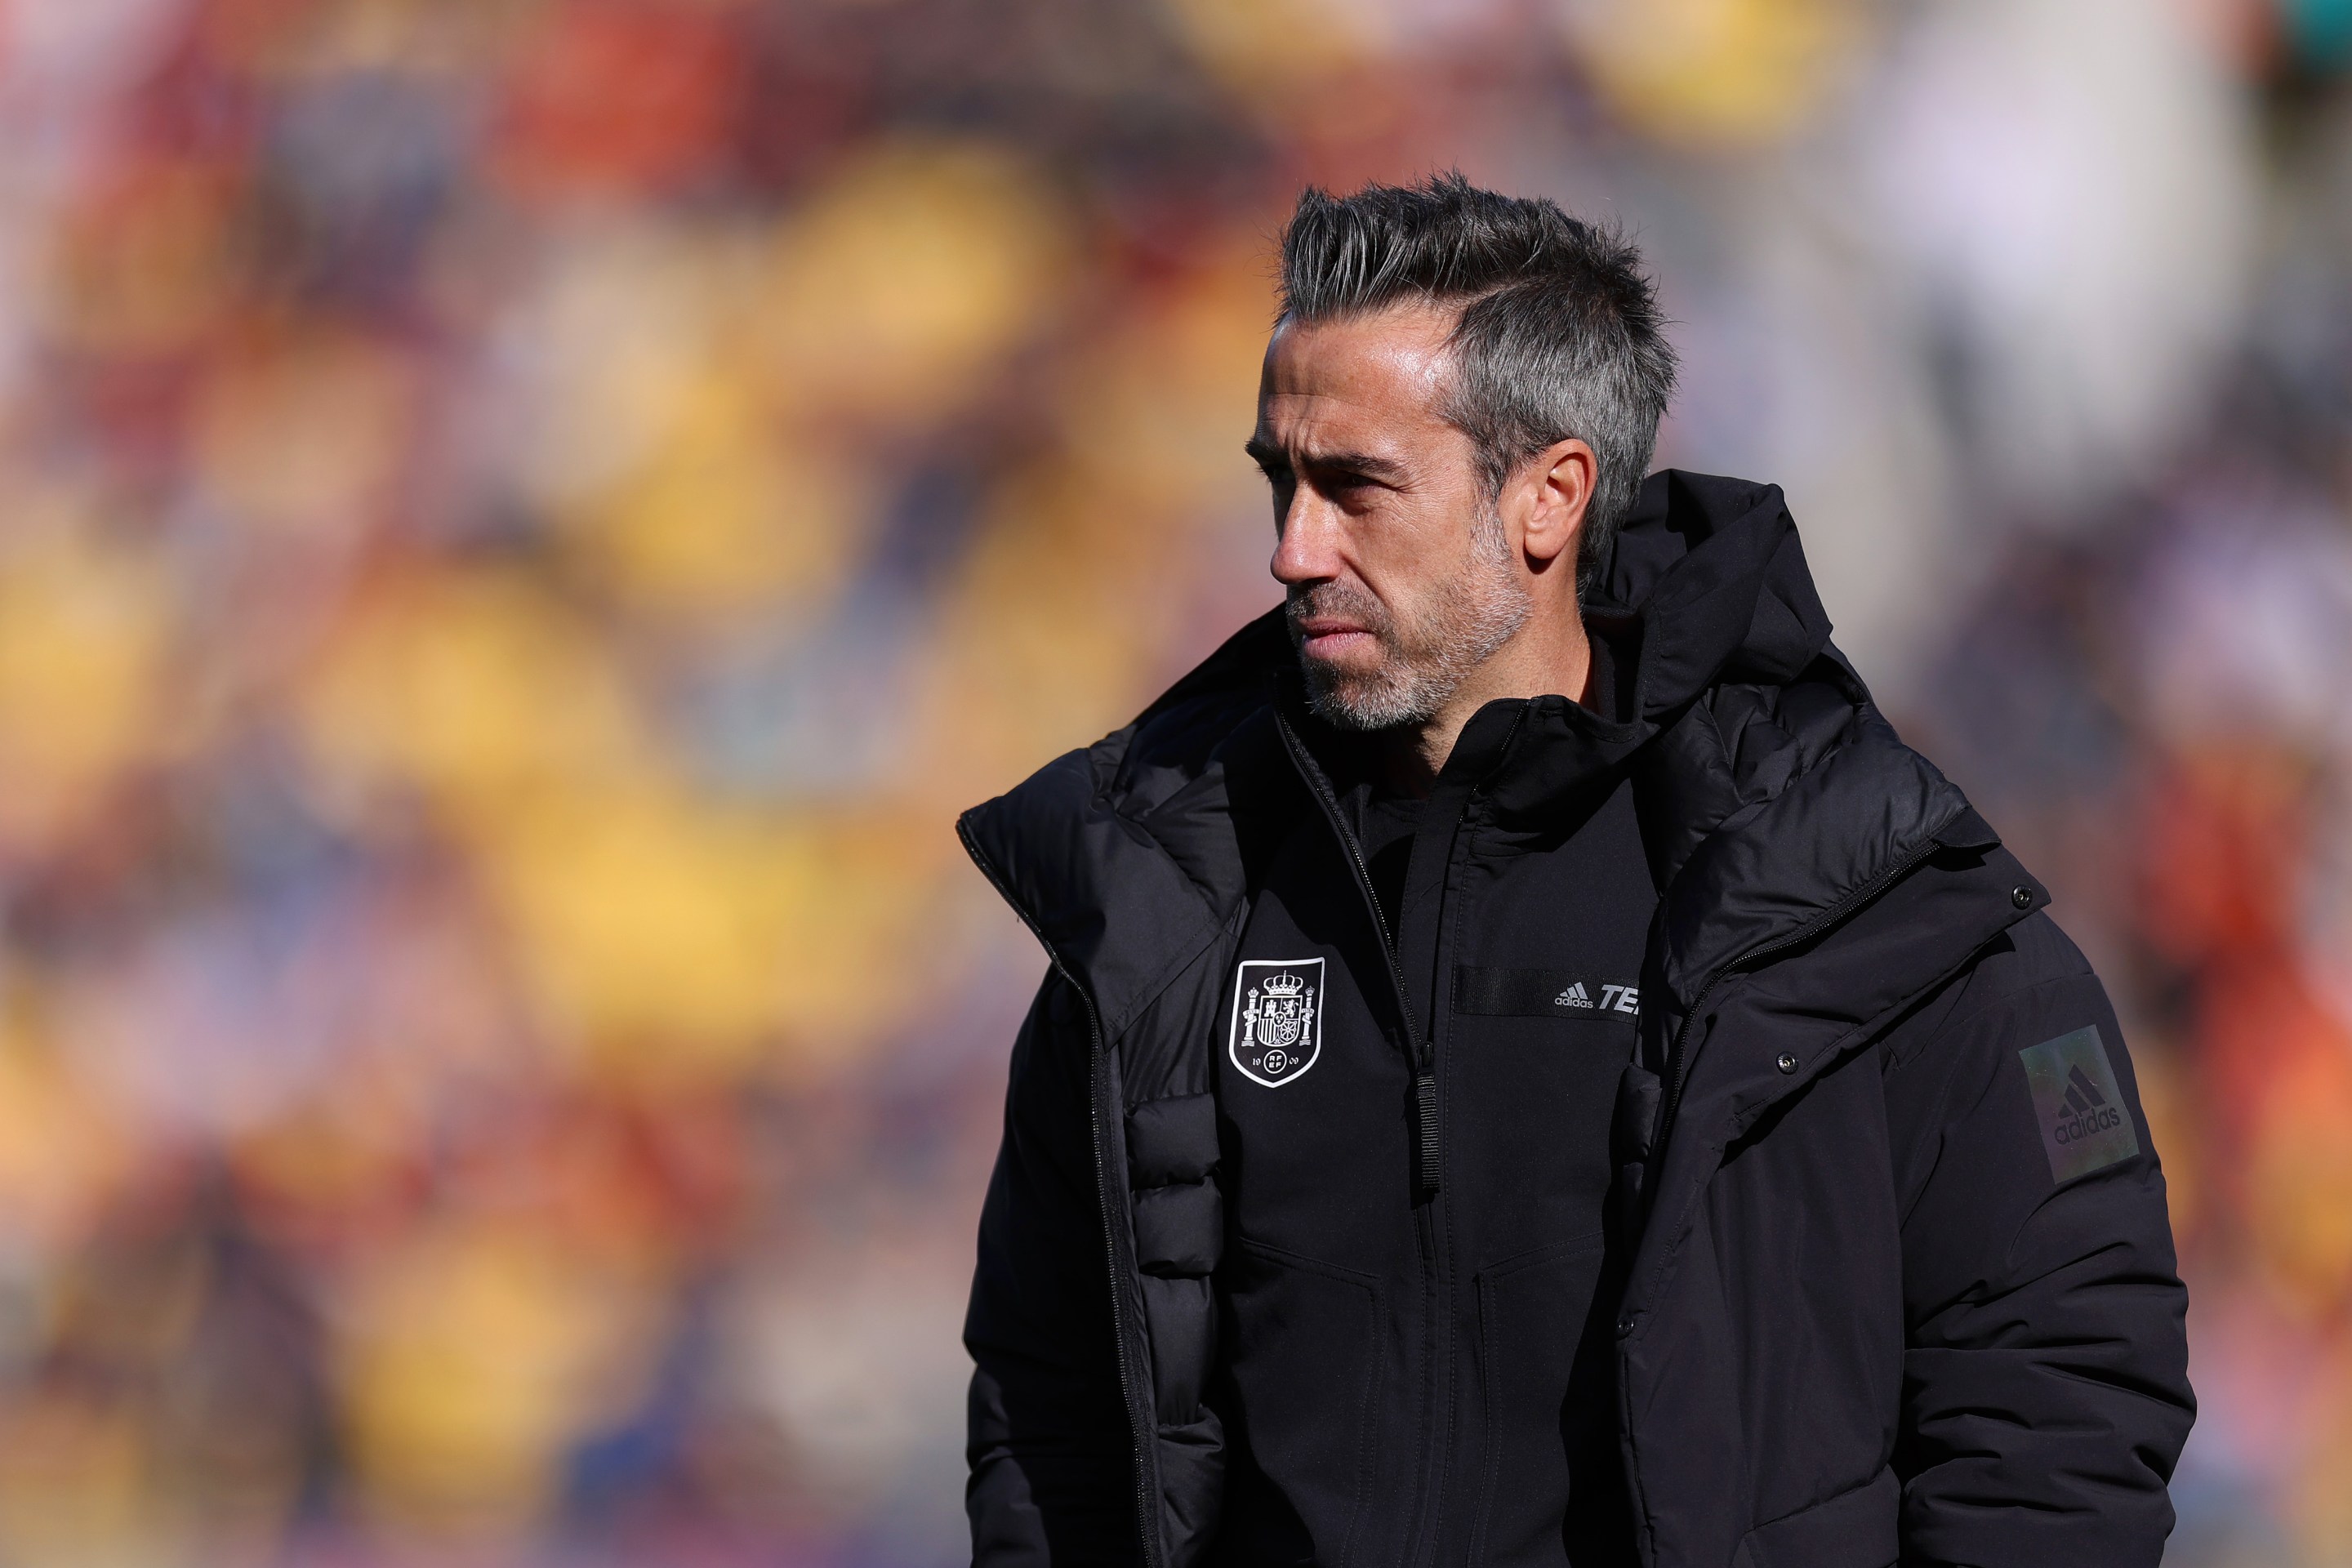 Jorge Vilda, Head Coach of Spain, looks on during the FIFA Women's World Cup Australia &amp; New Zealand 2023 Quarter Final match between Spain and Netherlands at Wellington Regional Stadium on August 11, 2023 in Wellington / Te Whanganui-a-Tara, New Zealand. (Photo by Katelyn Mulcahy - FIFA/FIFA via Getty Images)